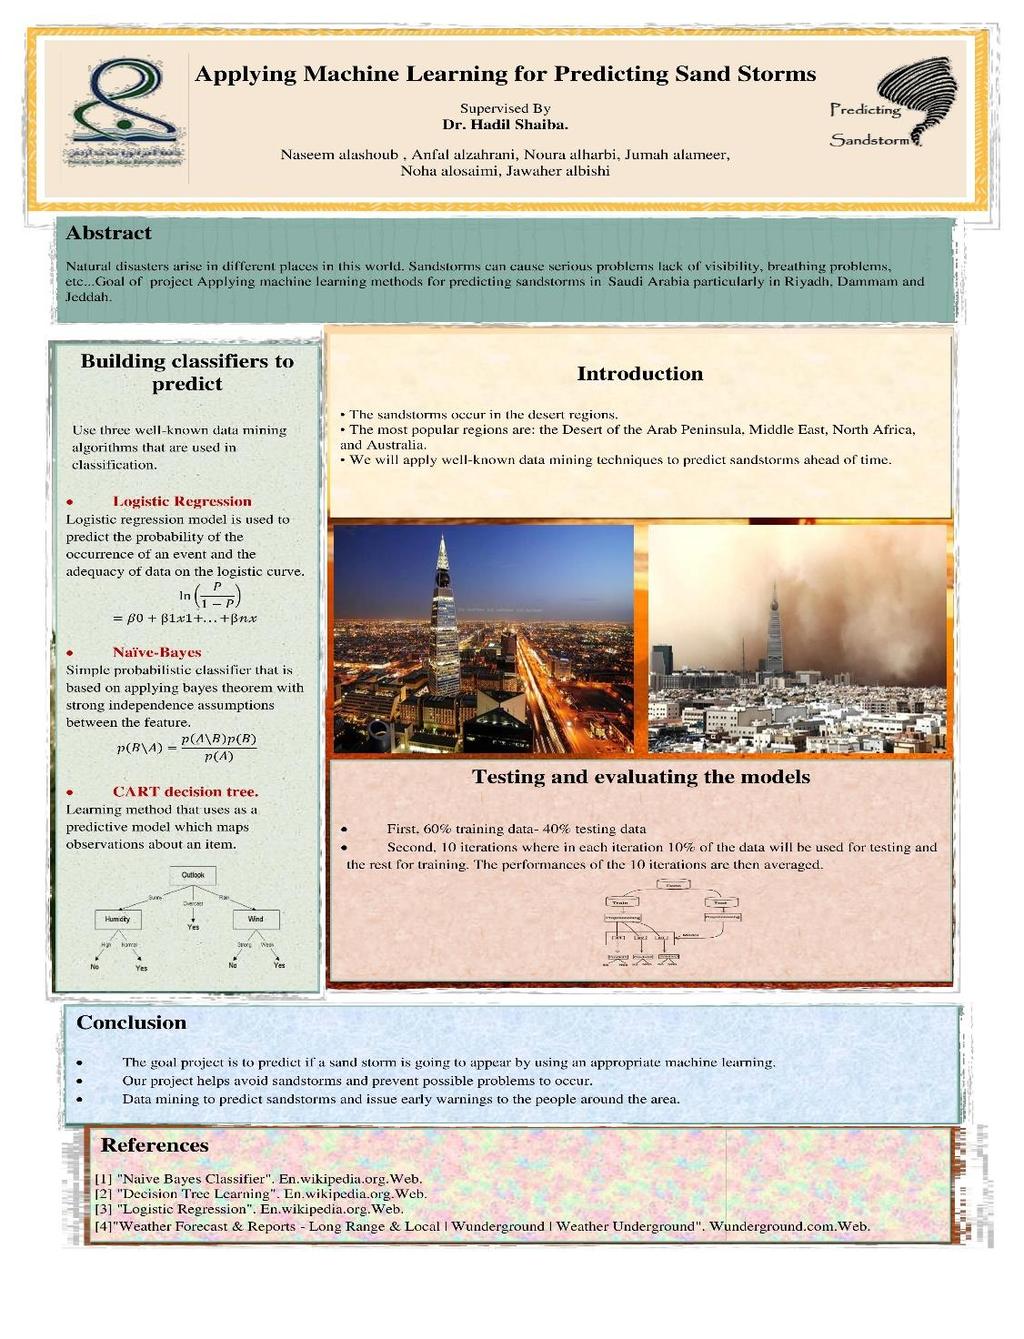 Applying Machine Learning for Predicting Sand Storms Dr.